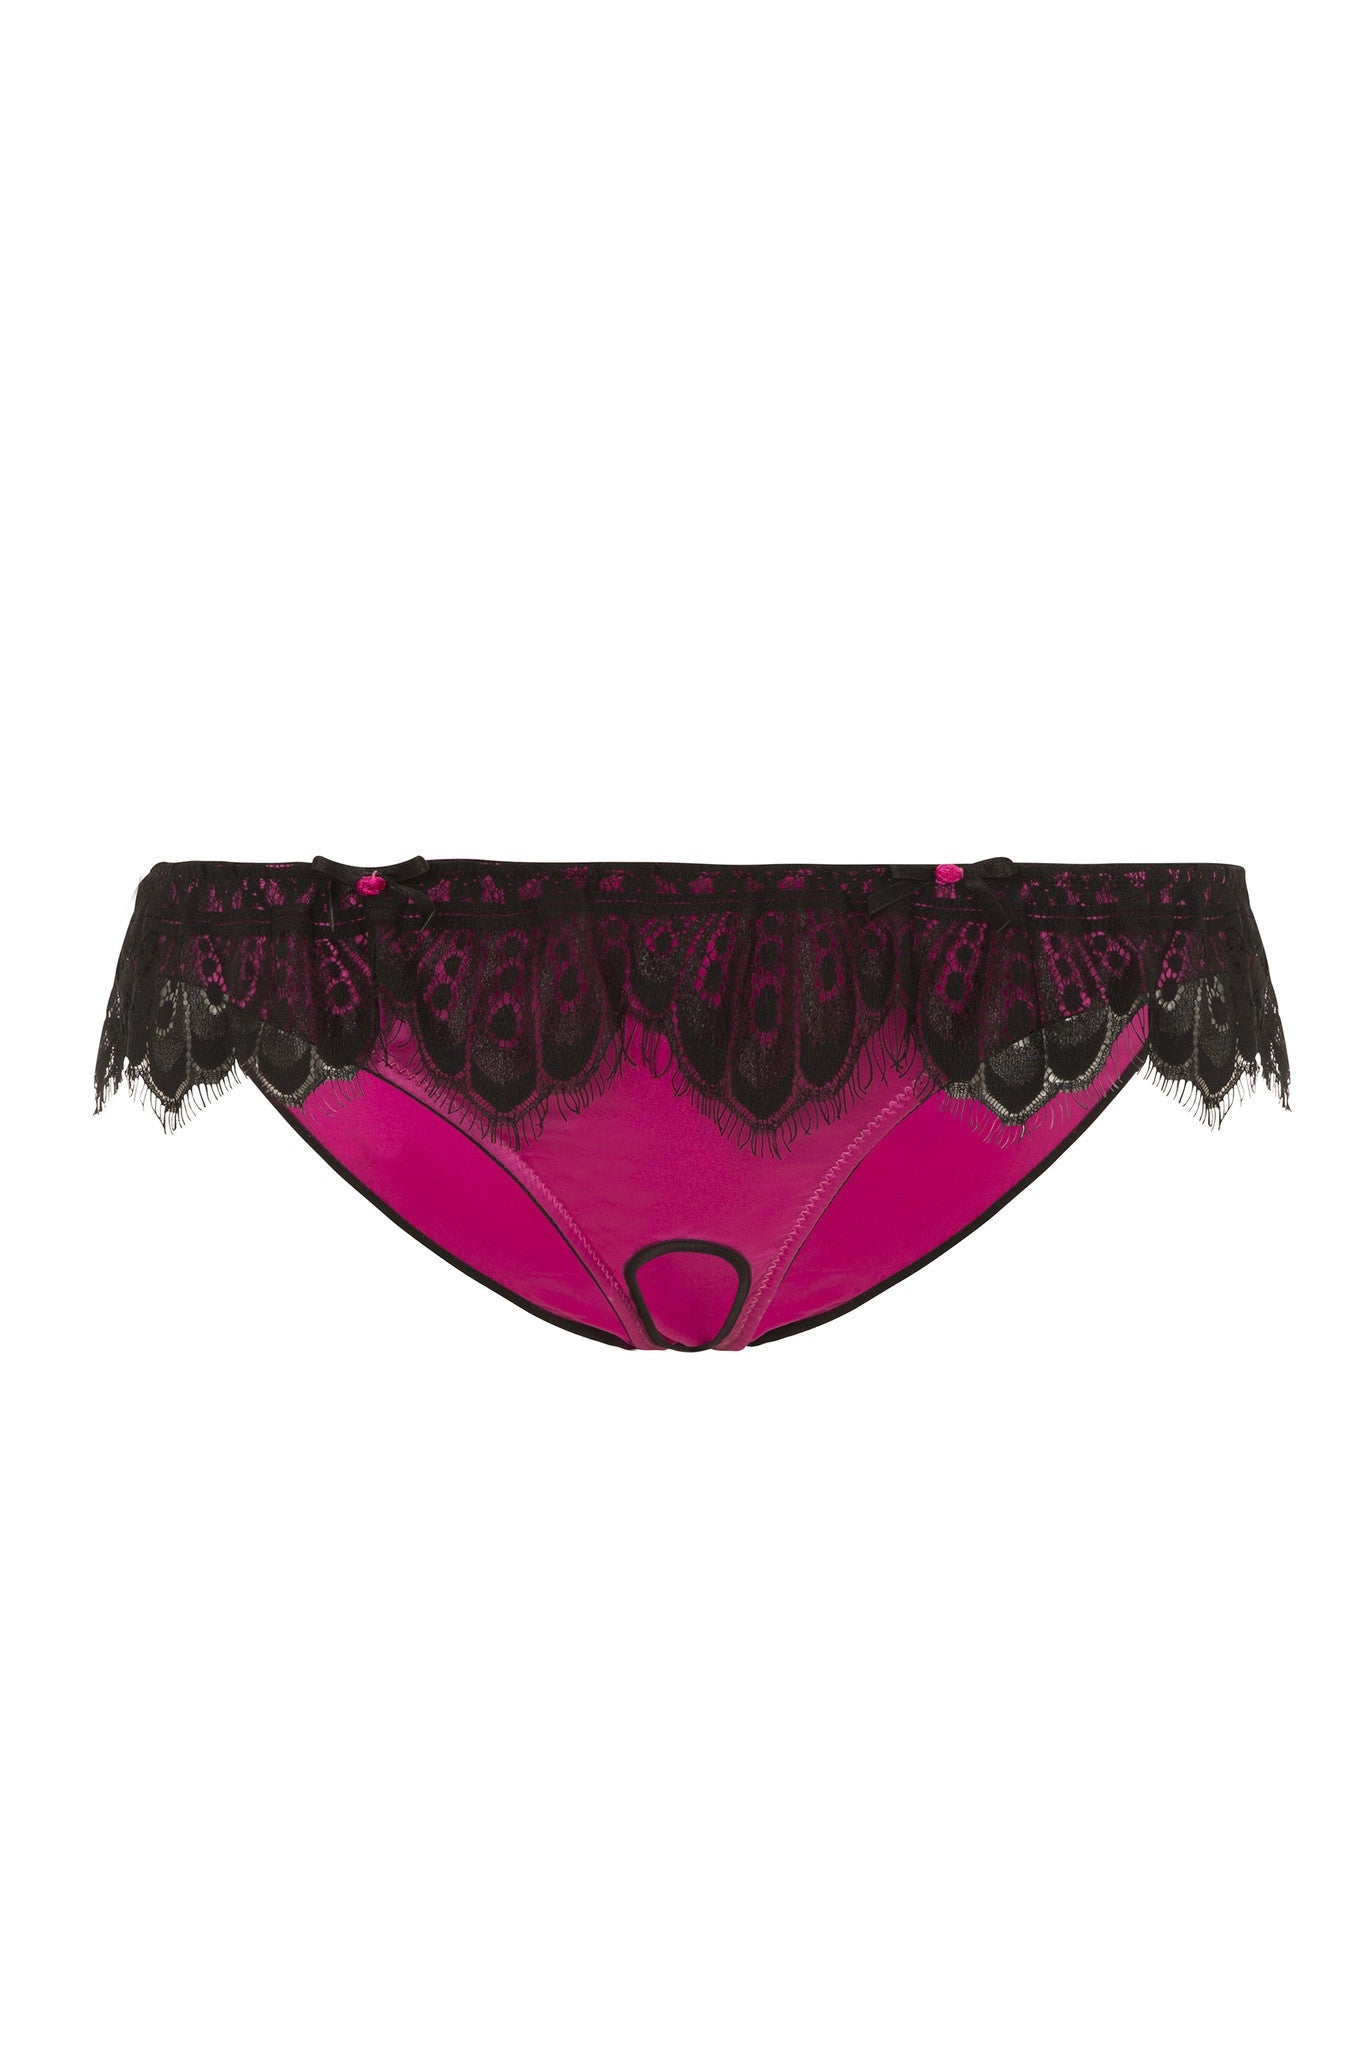 black eyelash lace pink fuchsia satin rose ouvert open crotchless brief skirt lingerie knickers